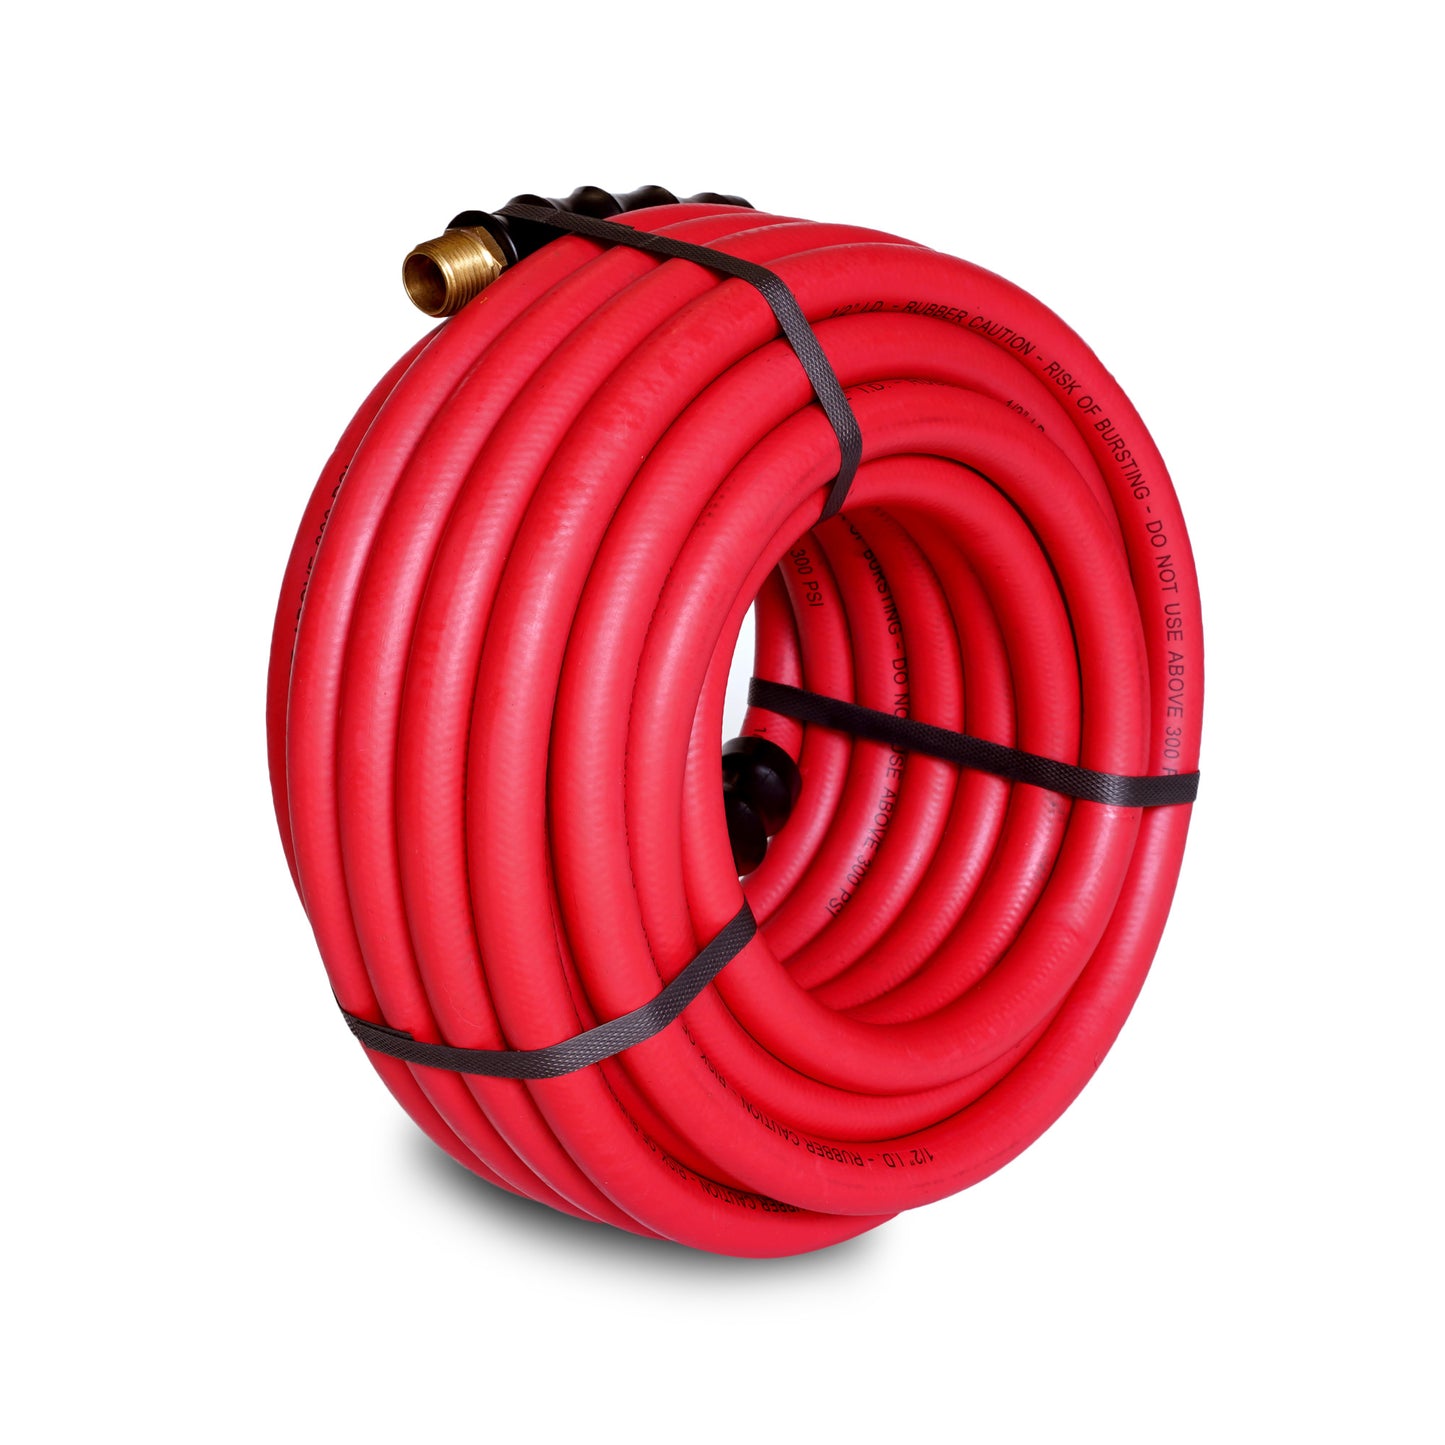 Shafman Traders - HOSE PIPE • 15M Flat hose pipe on a reel • Spray